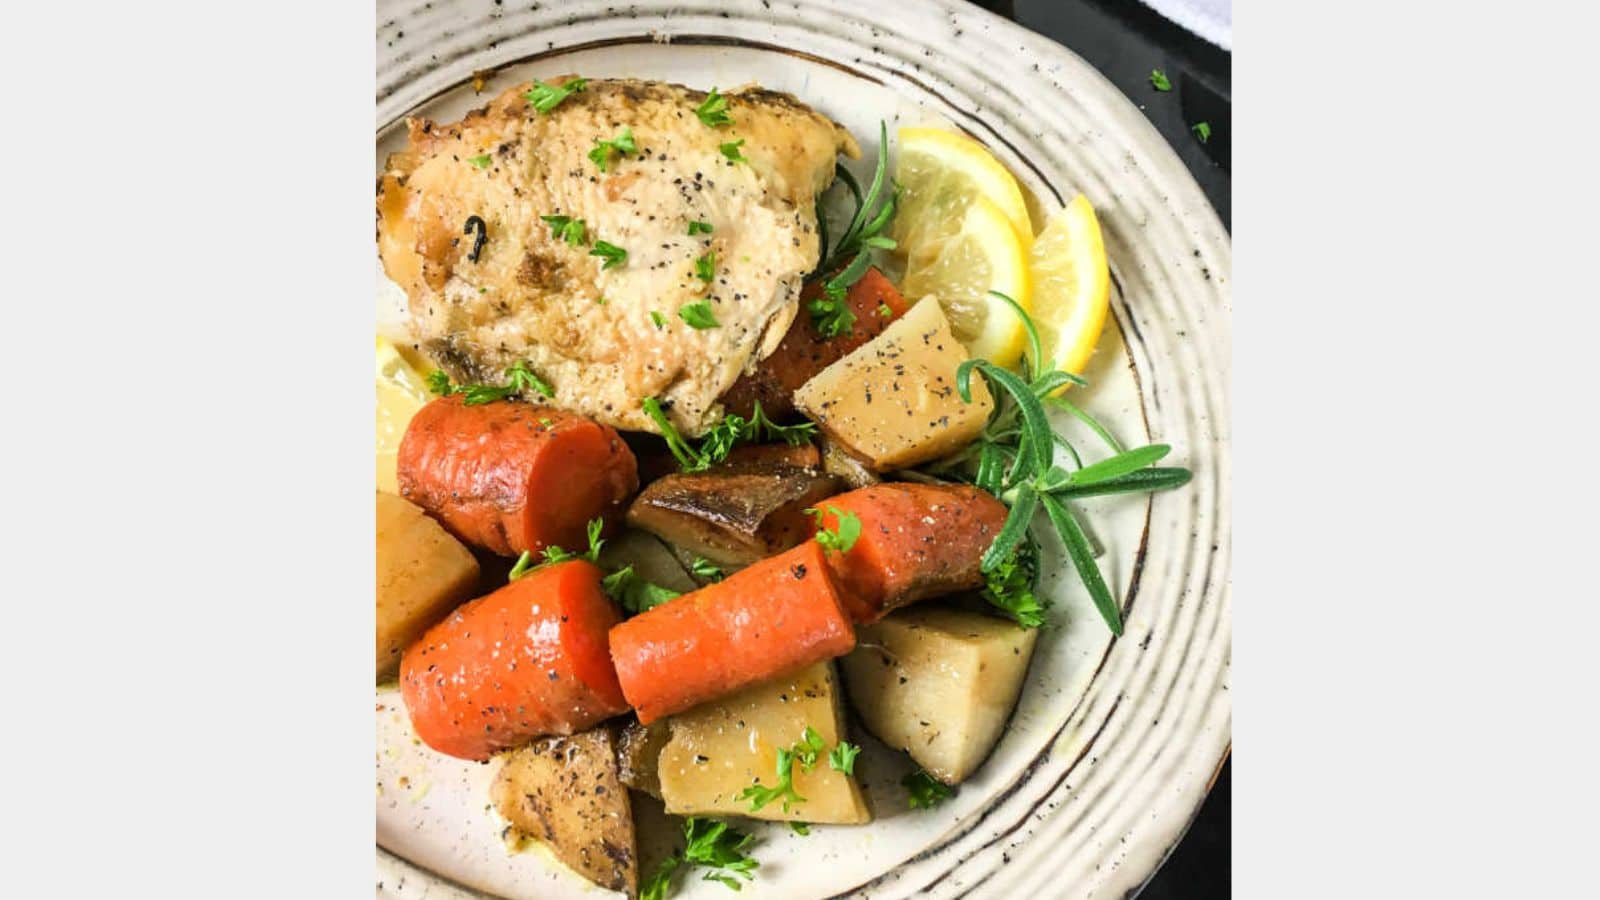 lemon chicken thigh with carrots